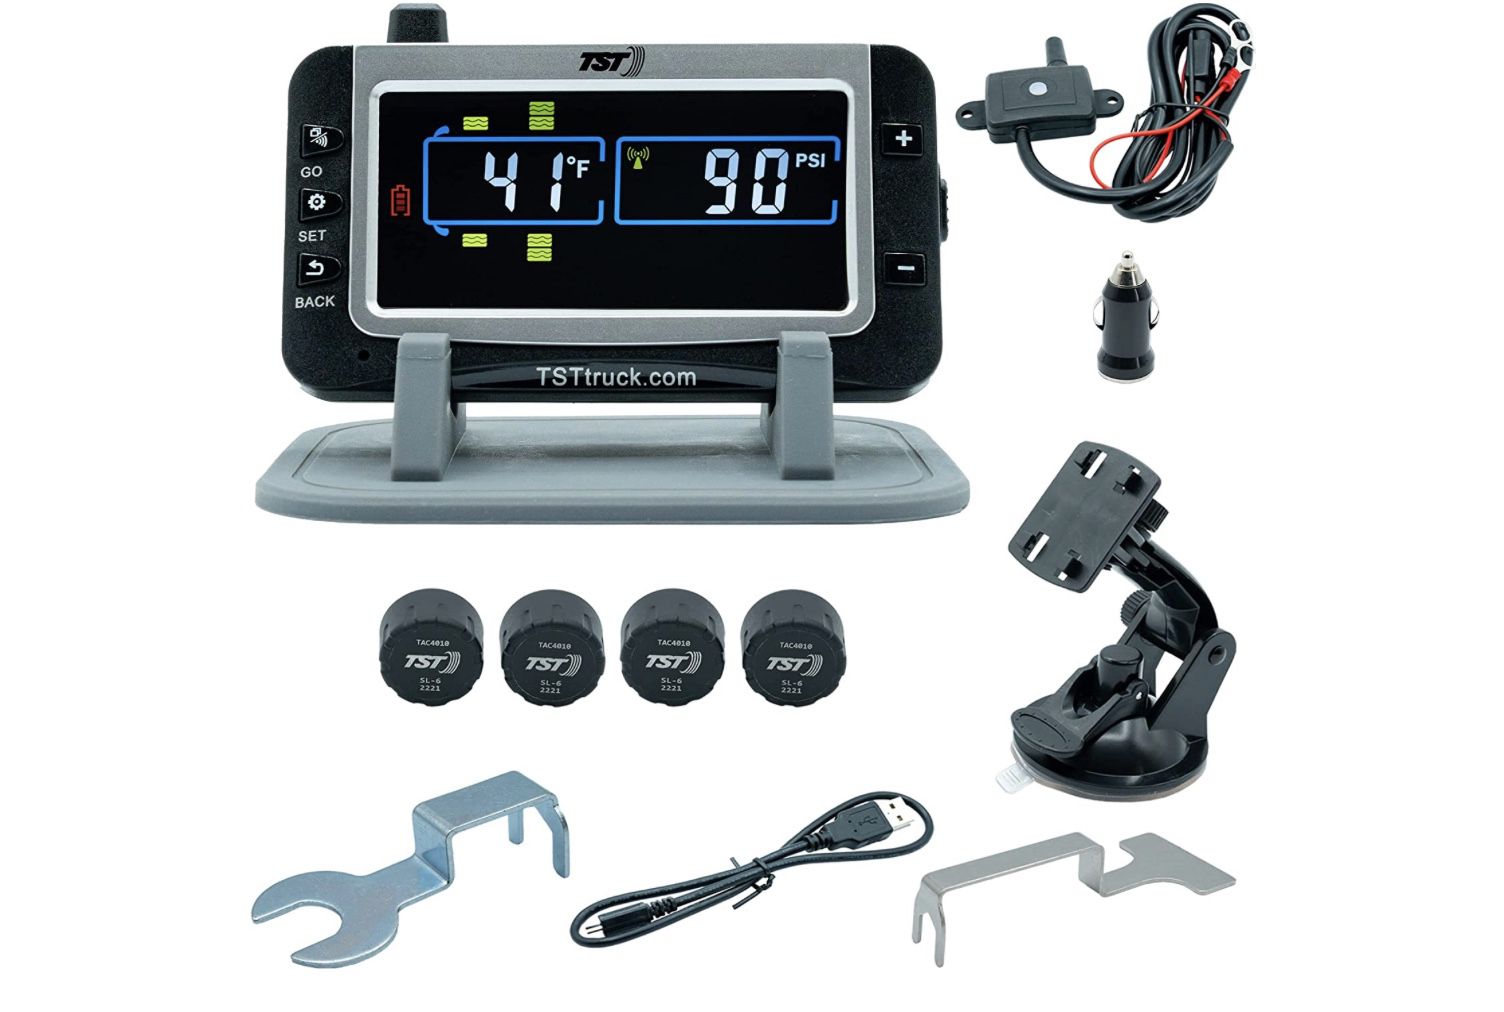 TST 507 Tire Pressure Monitoring System with 4 Cap Sensors